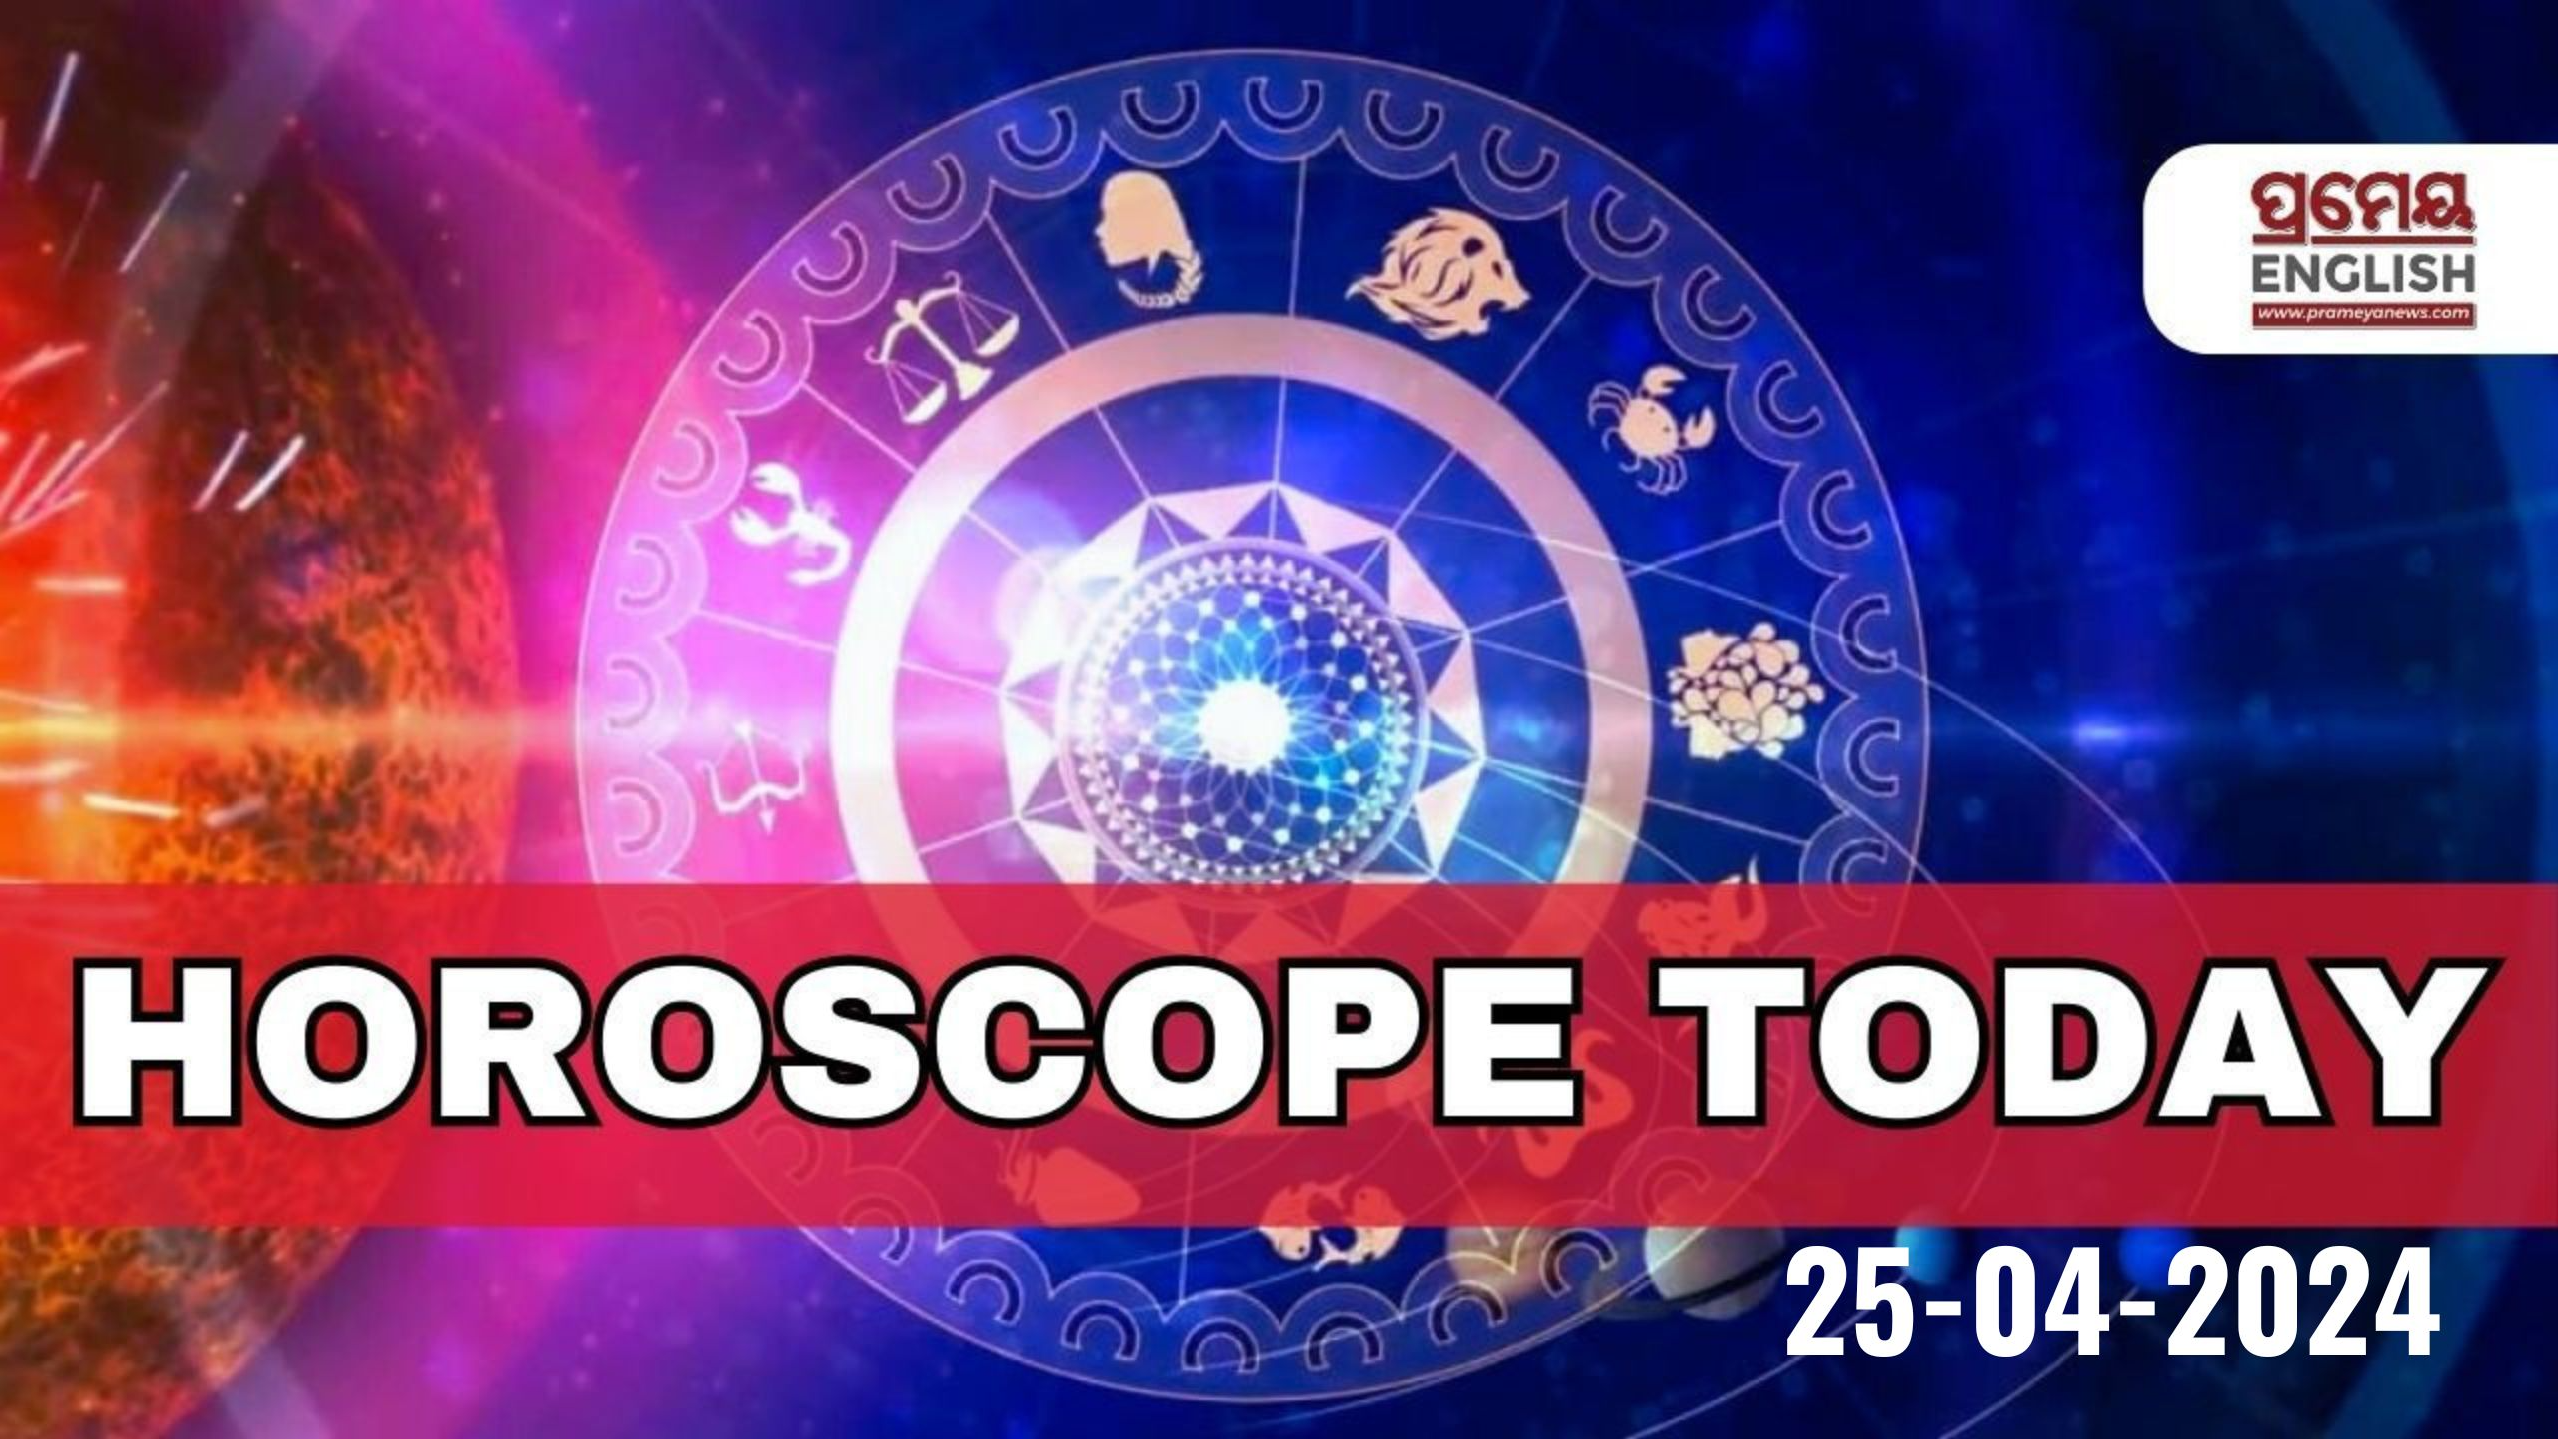  Horoscope Today: Astrological prediction for May 9, 2024